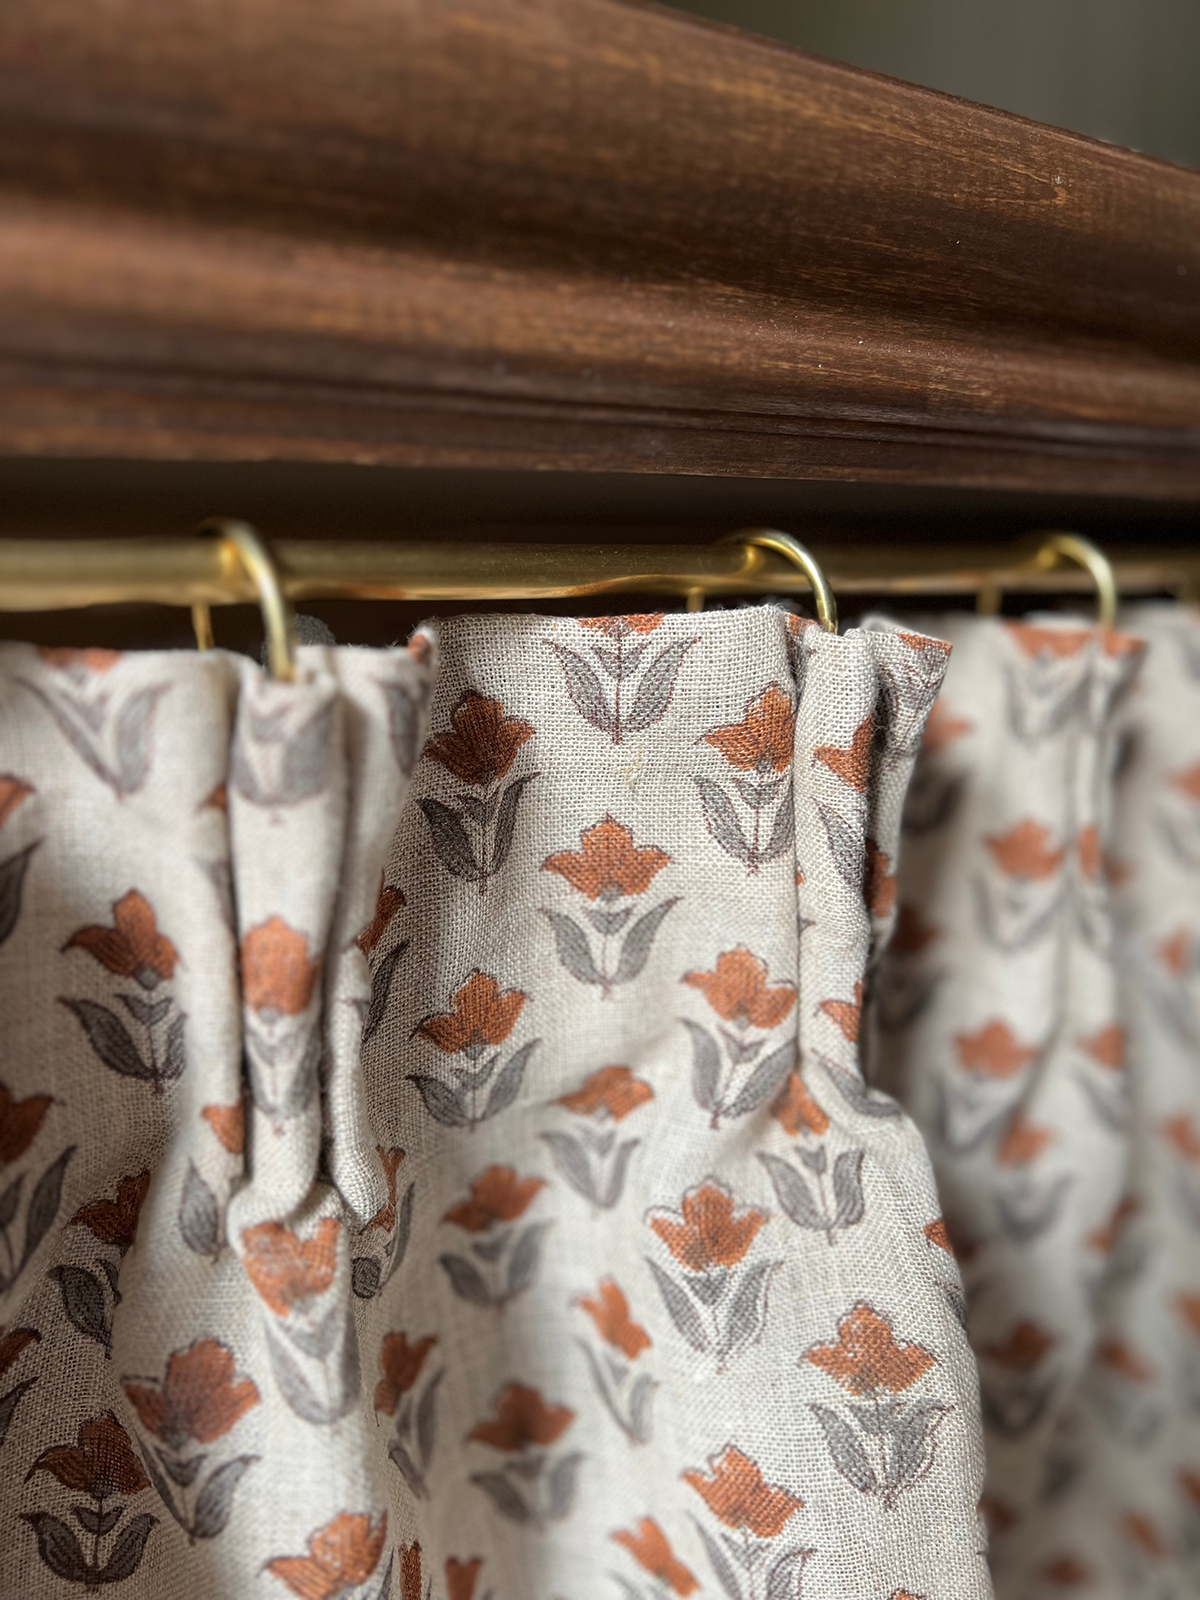 HOW TO MAKE A NO-SEW PINCH PLEAT CURTAIN - BREPURPOSED